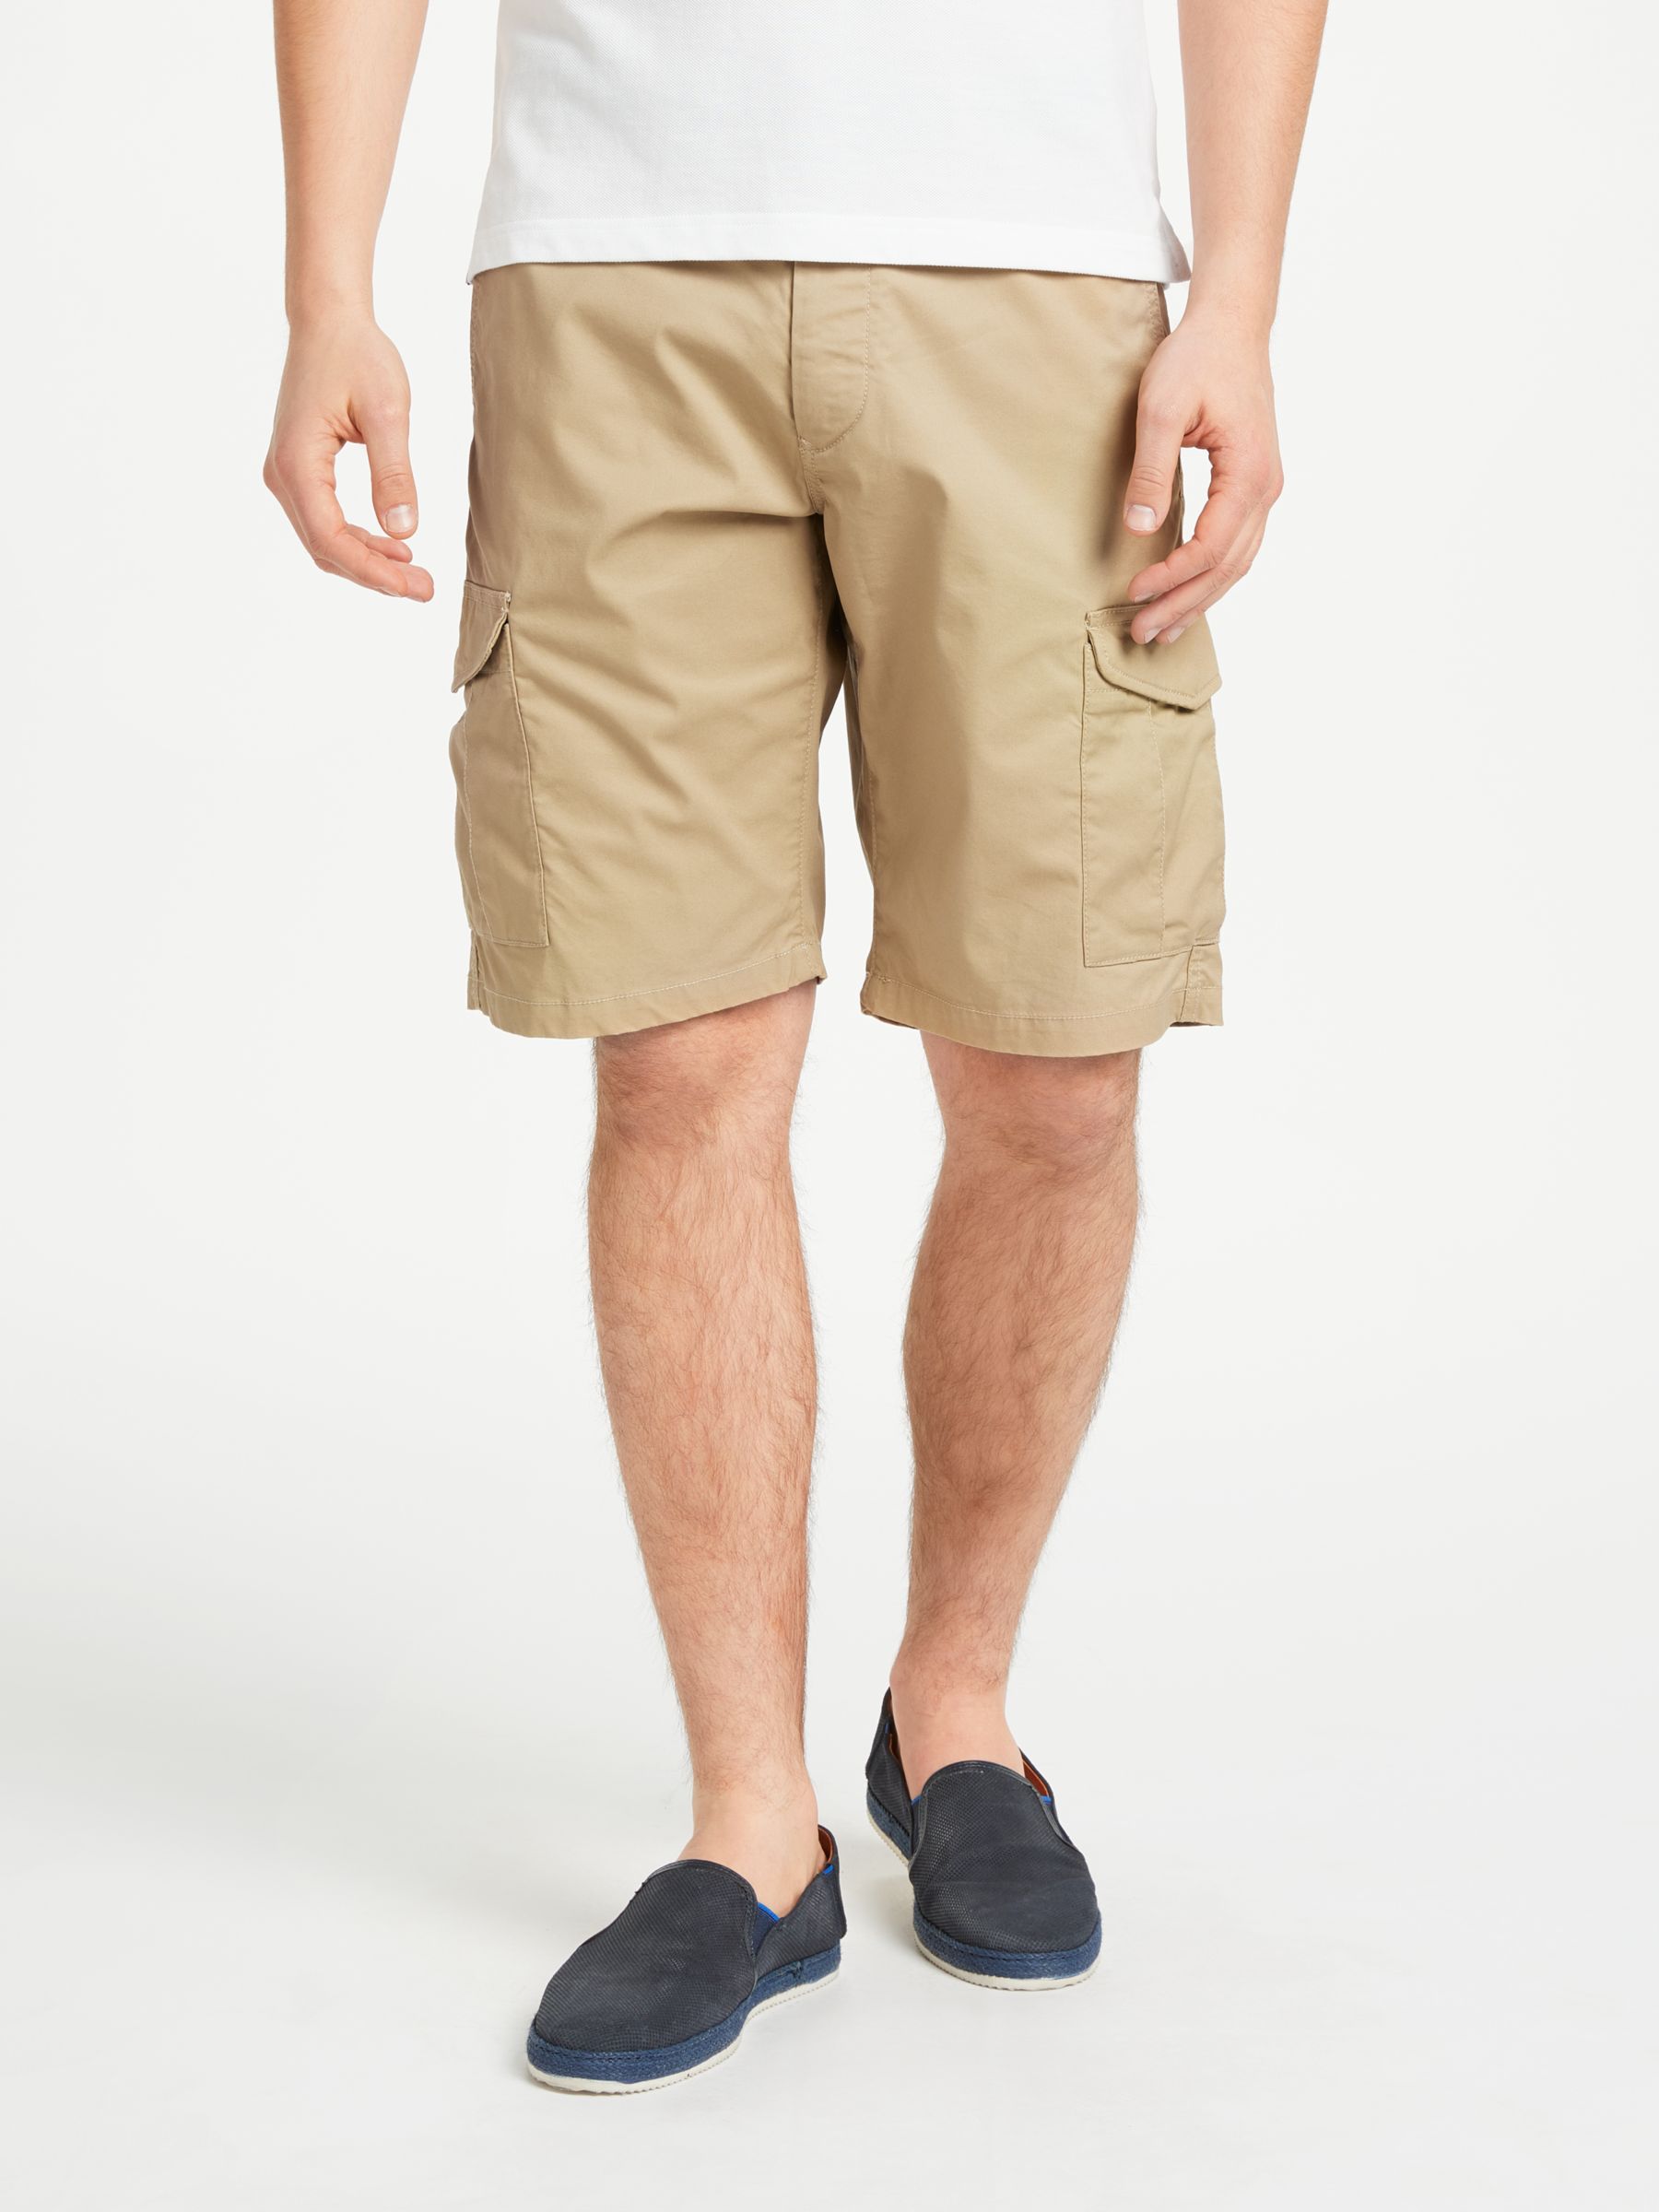 Gant Relaxed Belted Cargo Shorts, Stone, 32R